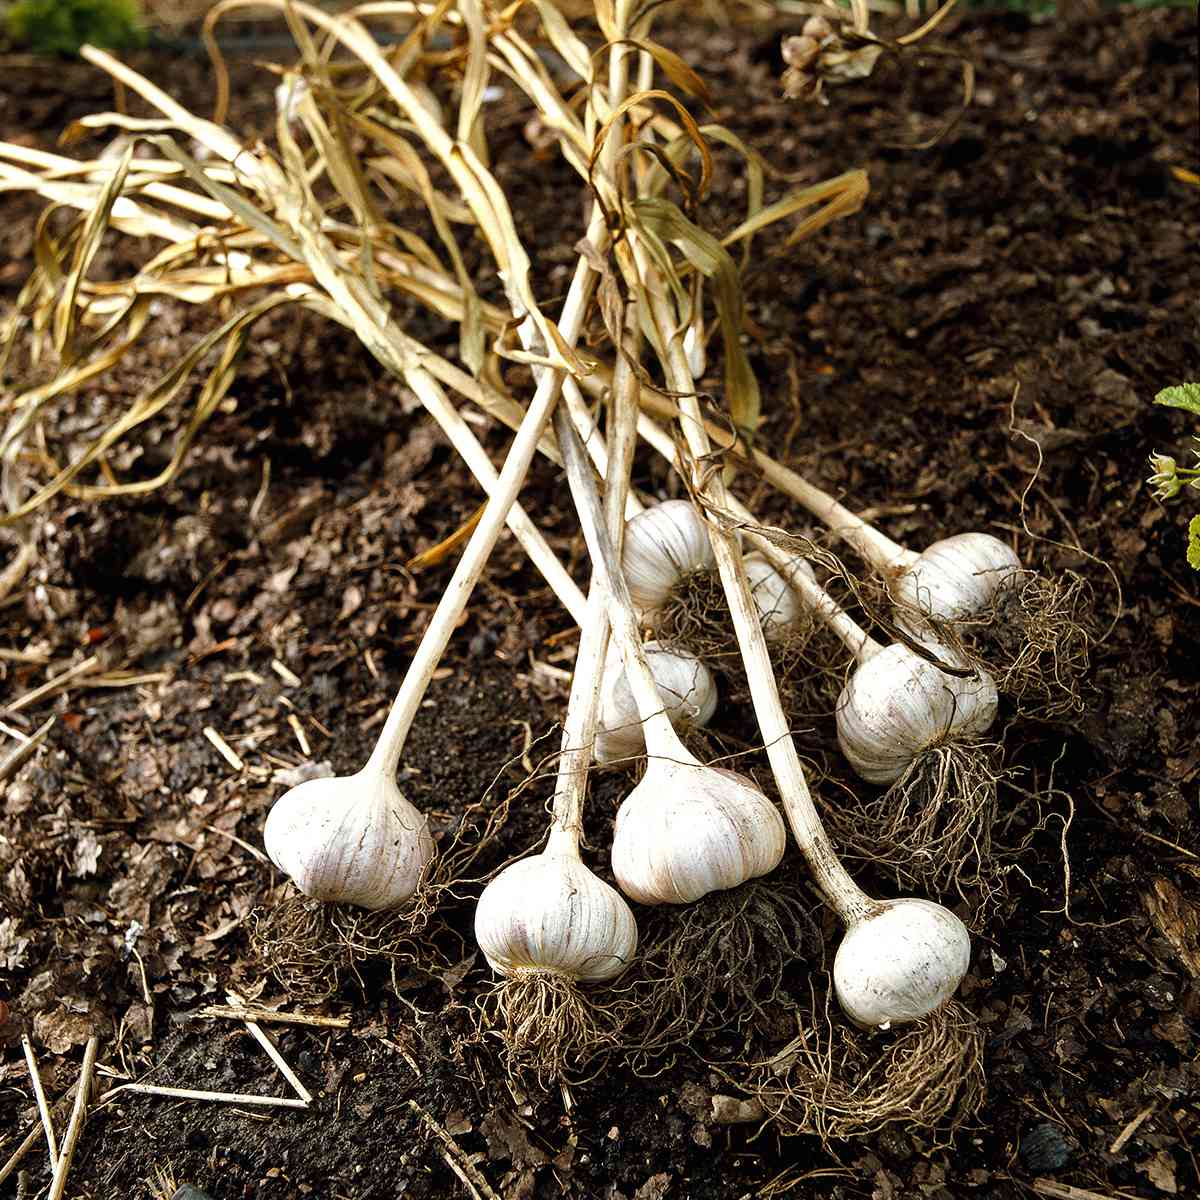 silver white garlic cloves in dirt and mulch